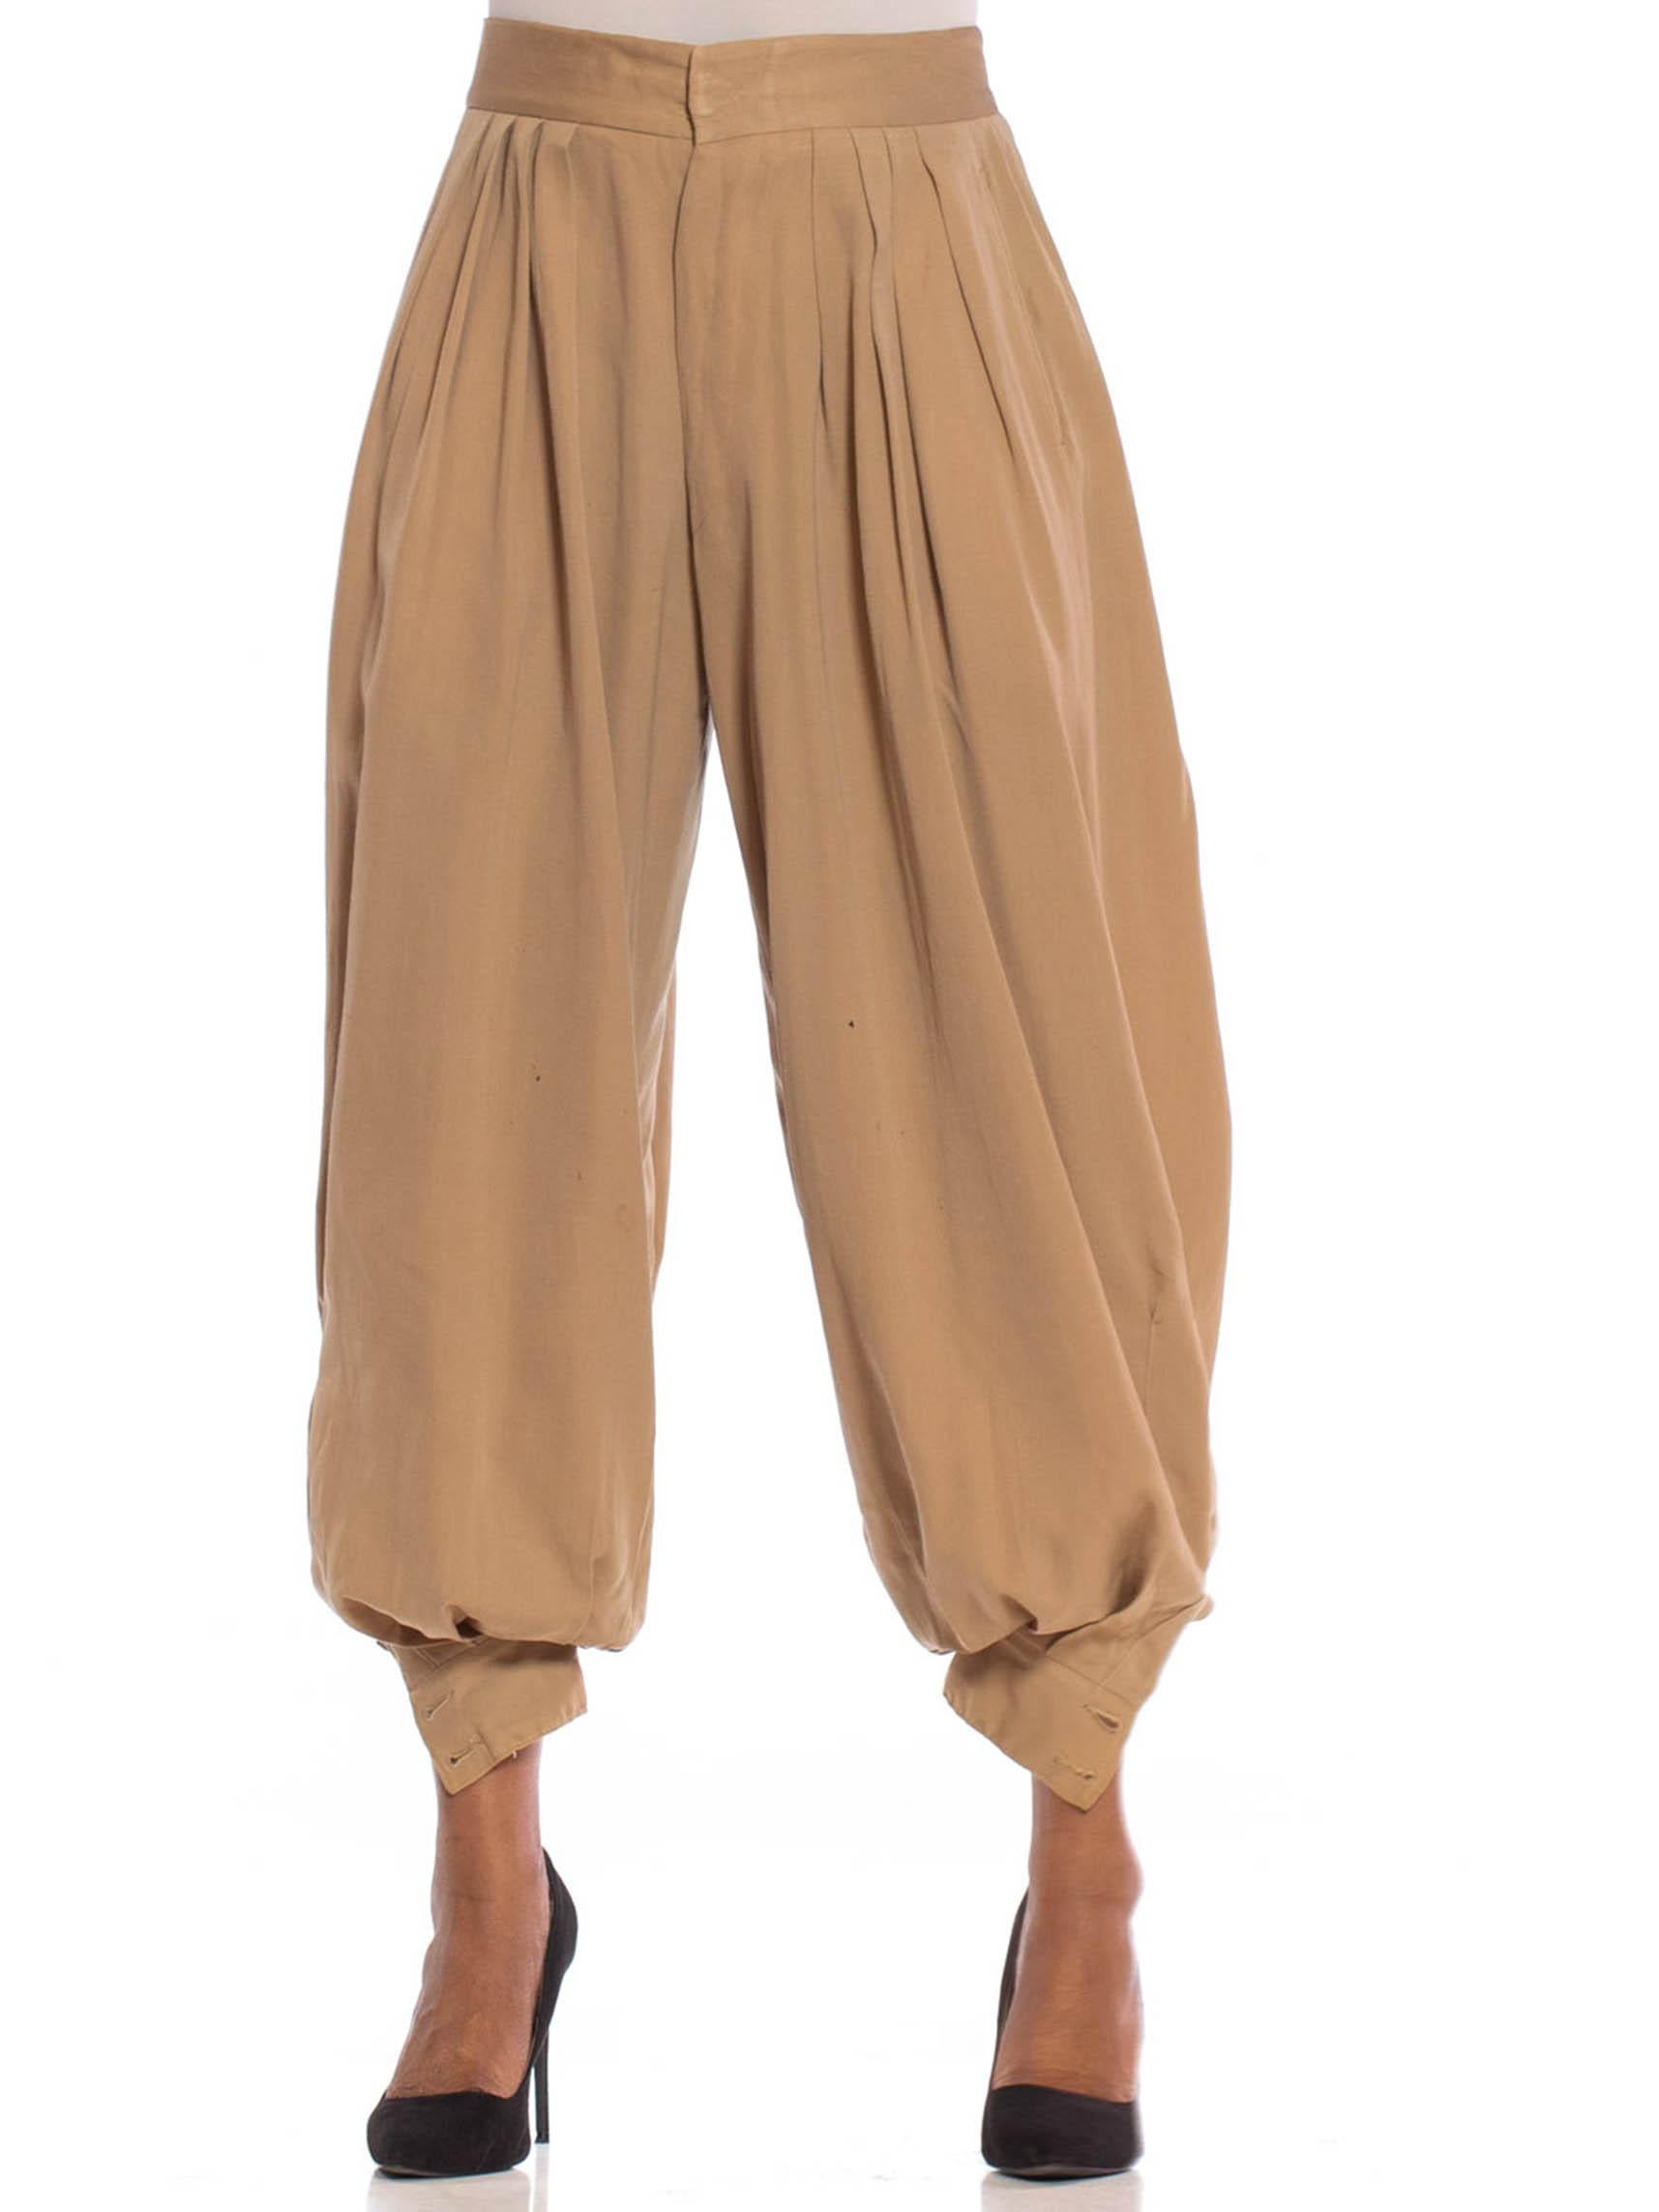 1930S Beige Wool Gabardine  Voluminous Theatrical Mens Pants From Hollywood In Excellent Condition For Sale In New York, NY